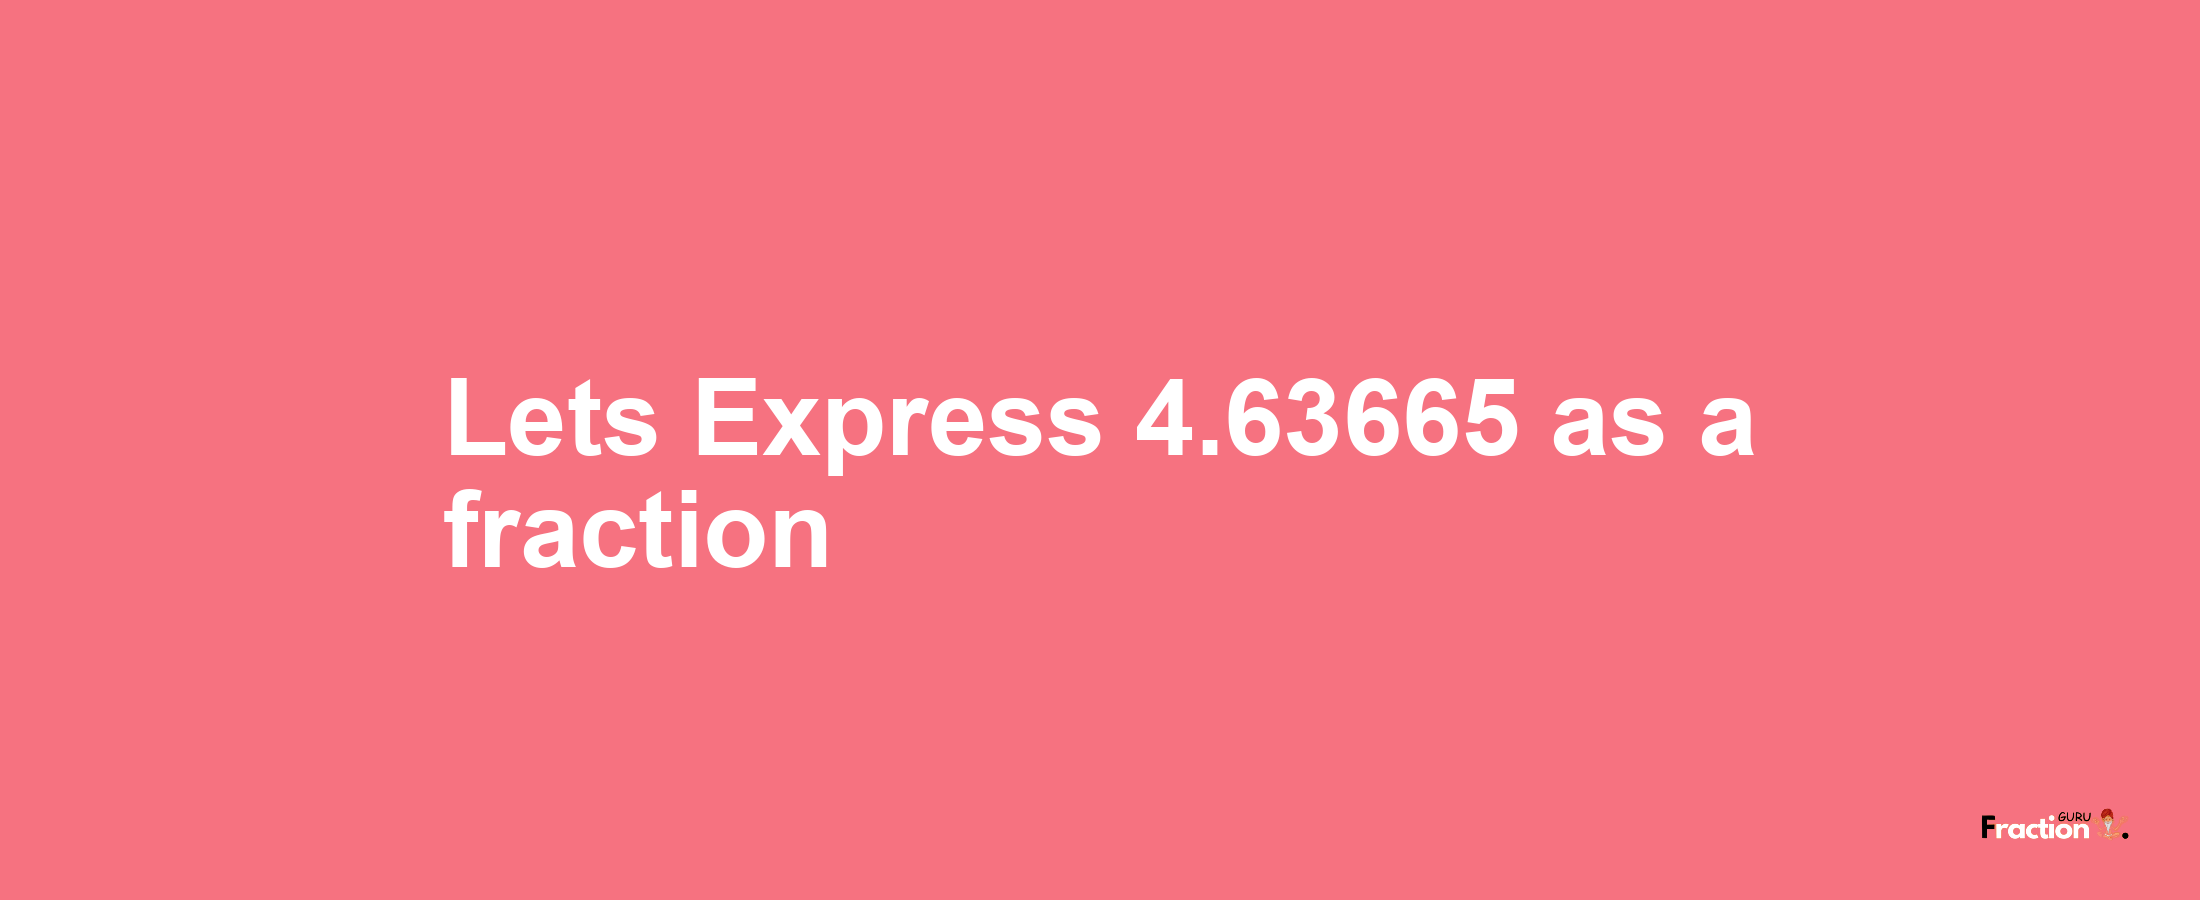 Lets Express 4.63665 as afraction